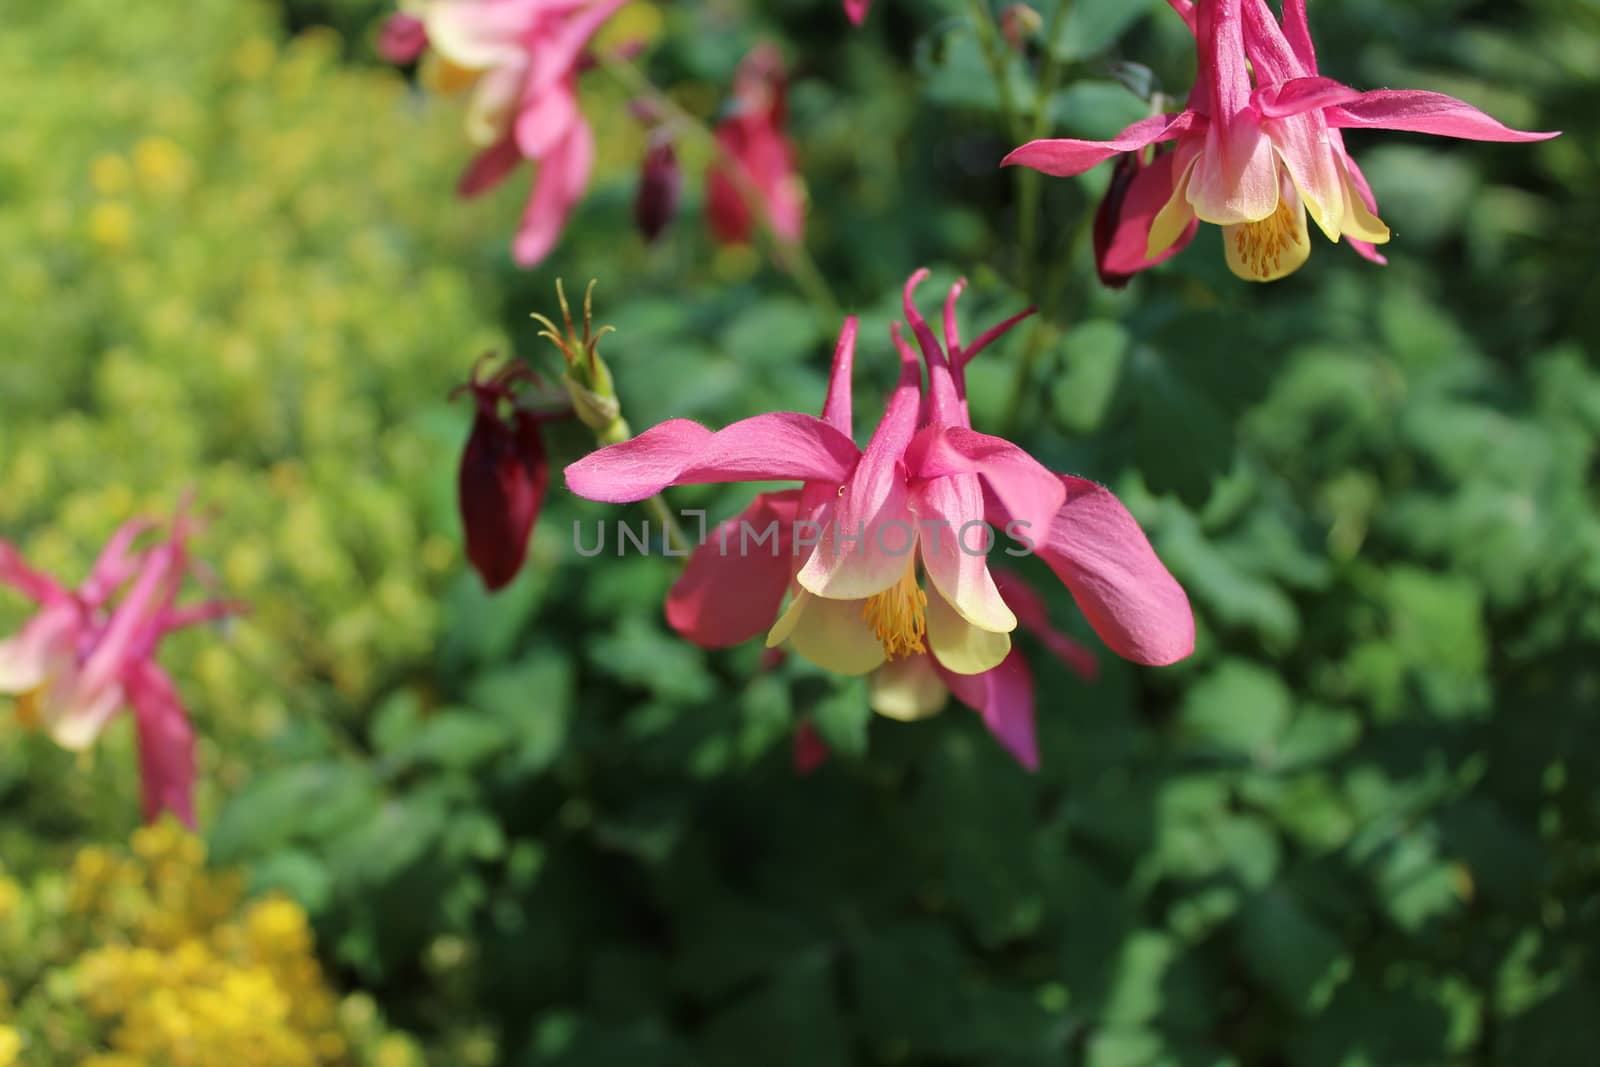 The picture shows a pink columbine in the garden.